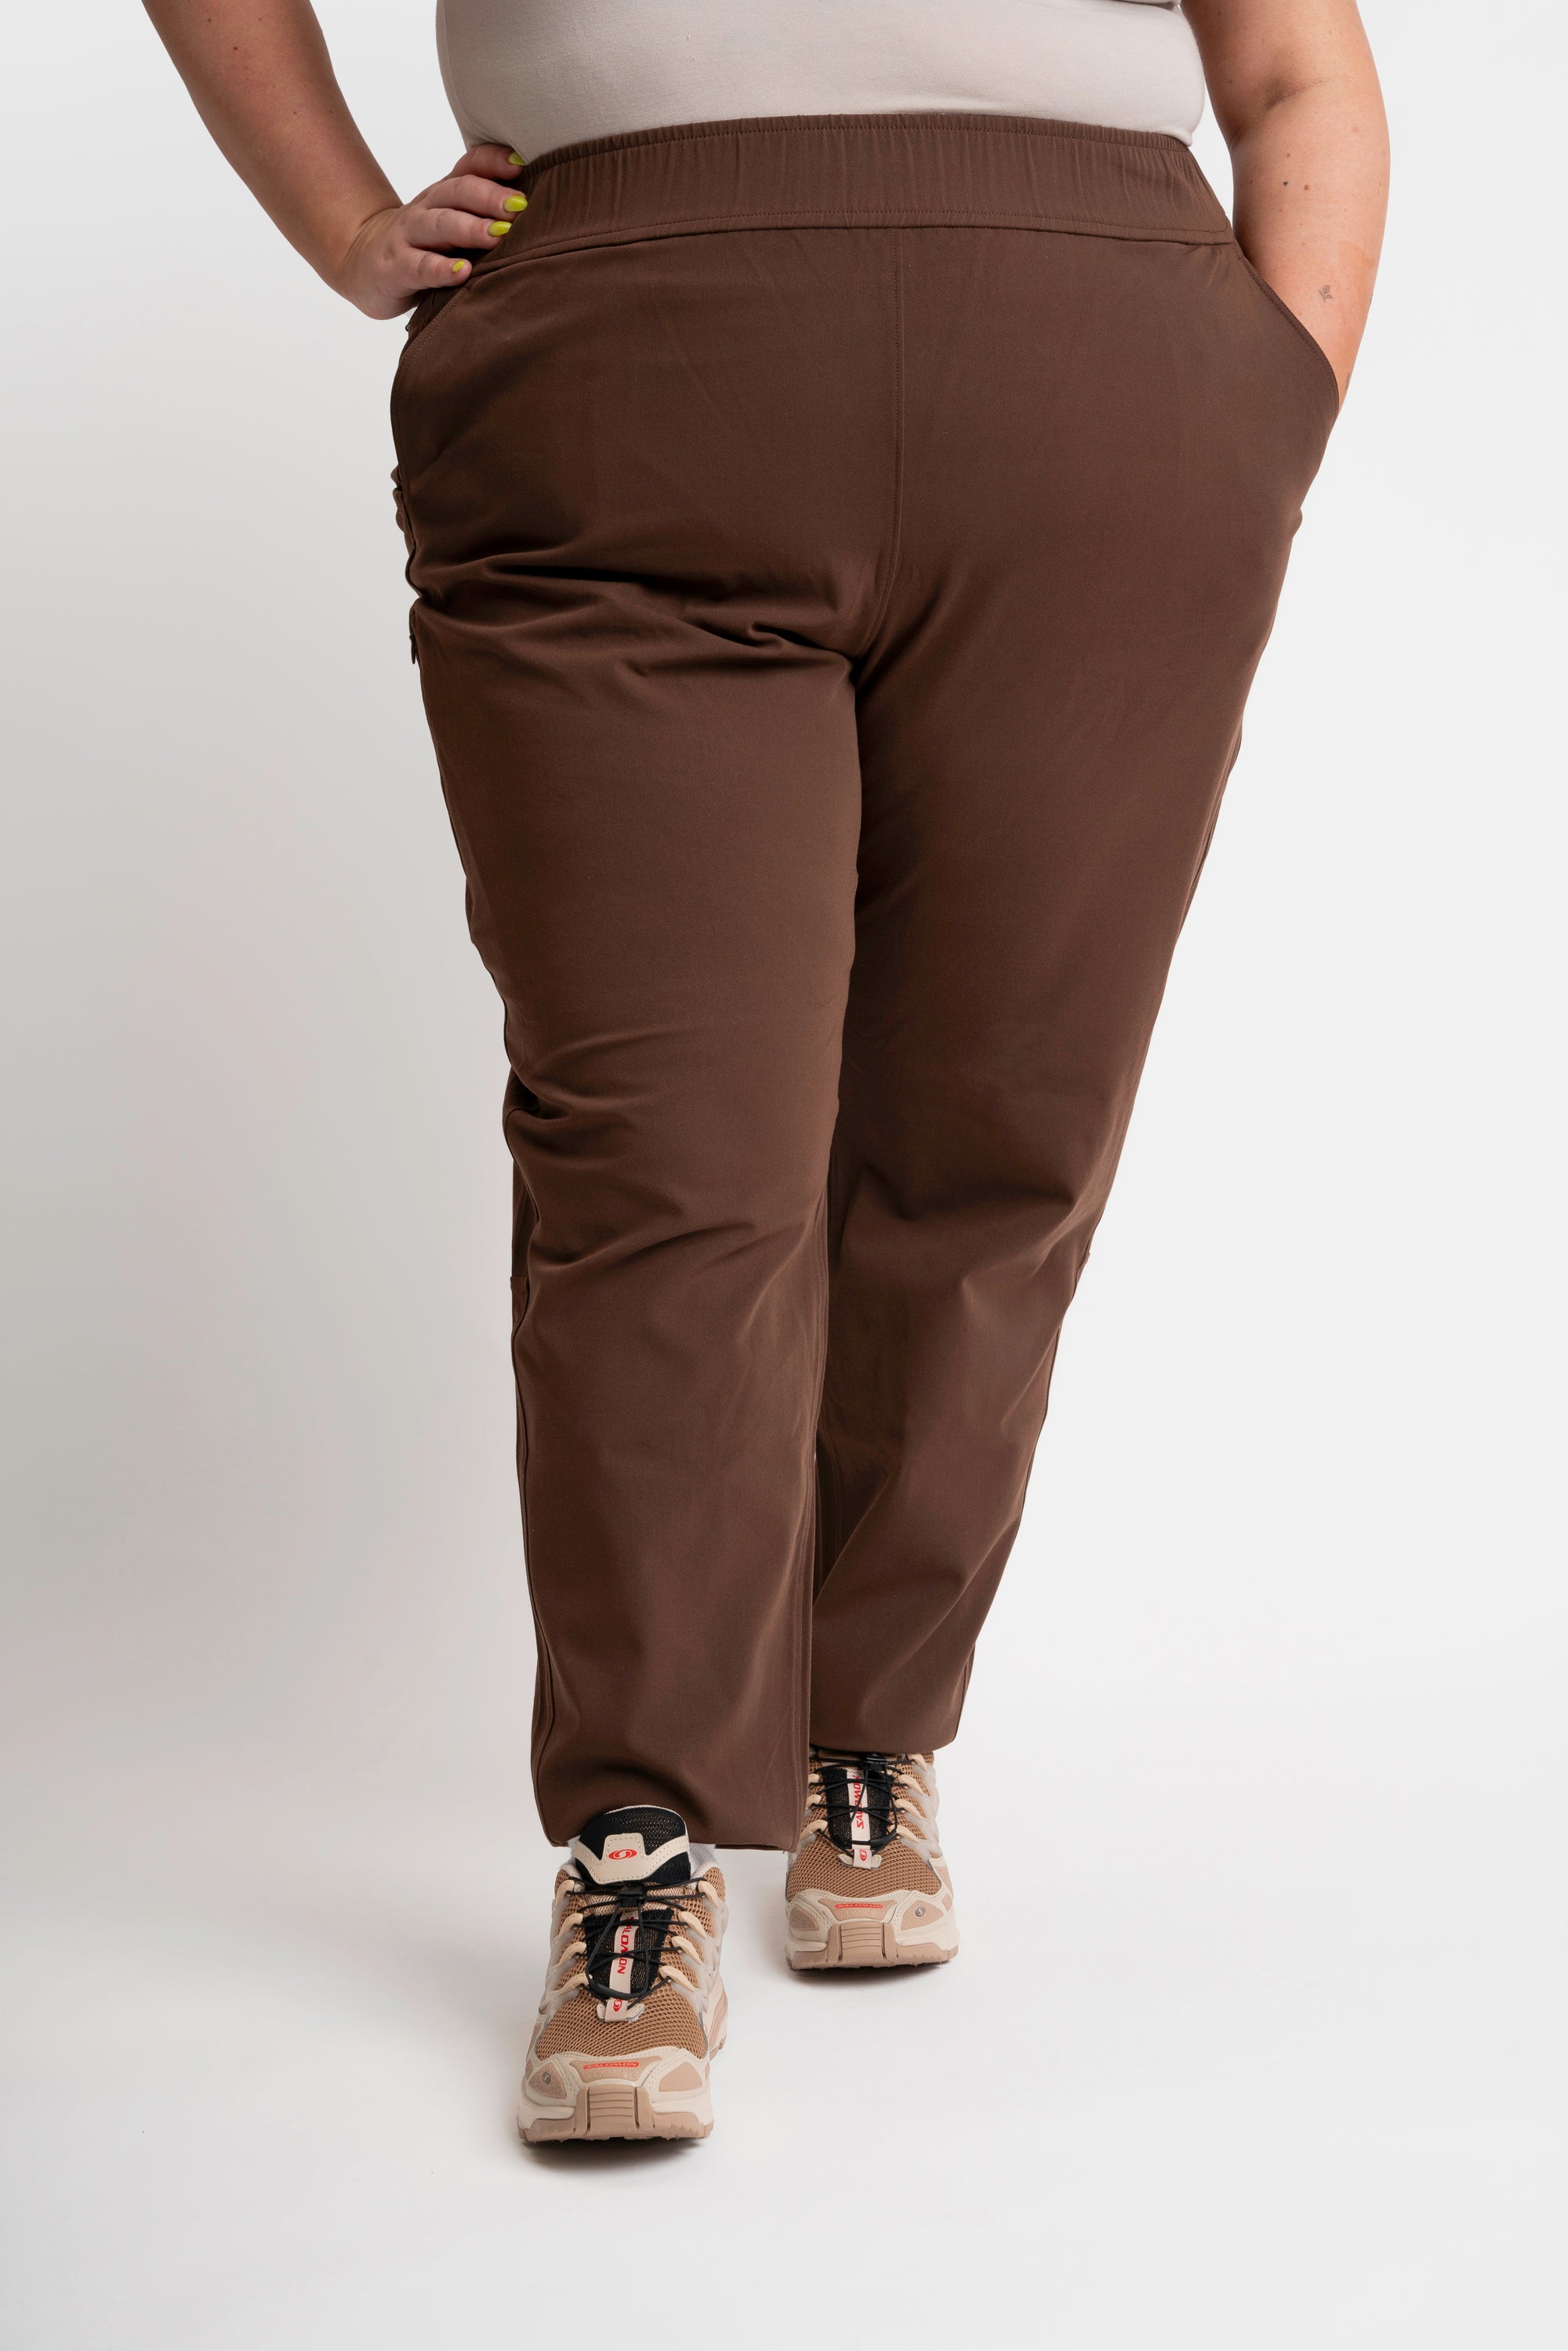 Women's Plus Size Super-Stretch Solid Leggings Brown One Size Fits Most  Plus - White Mark